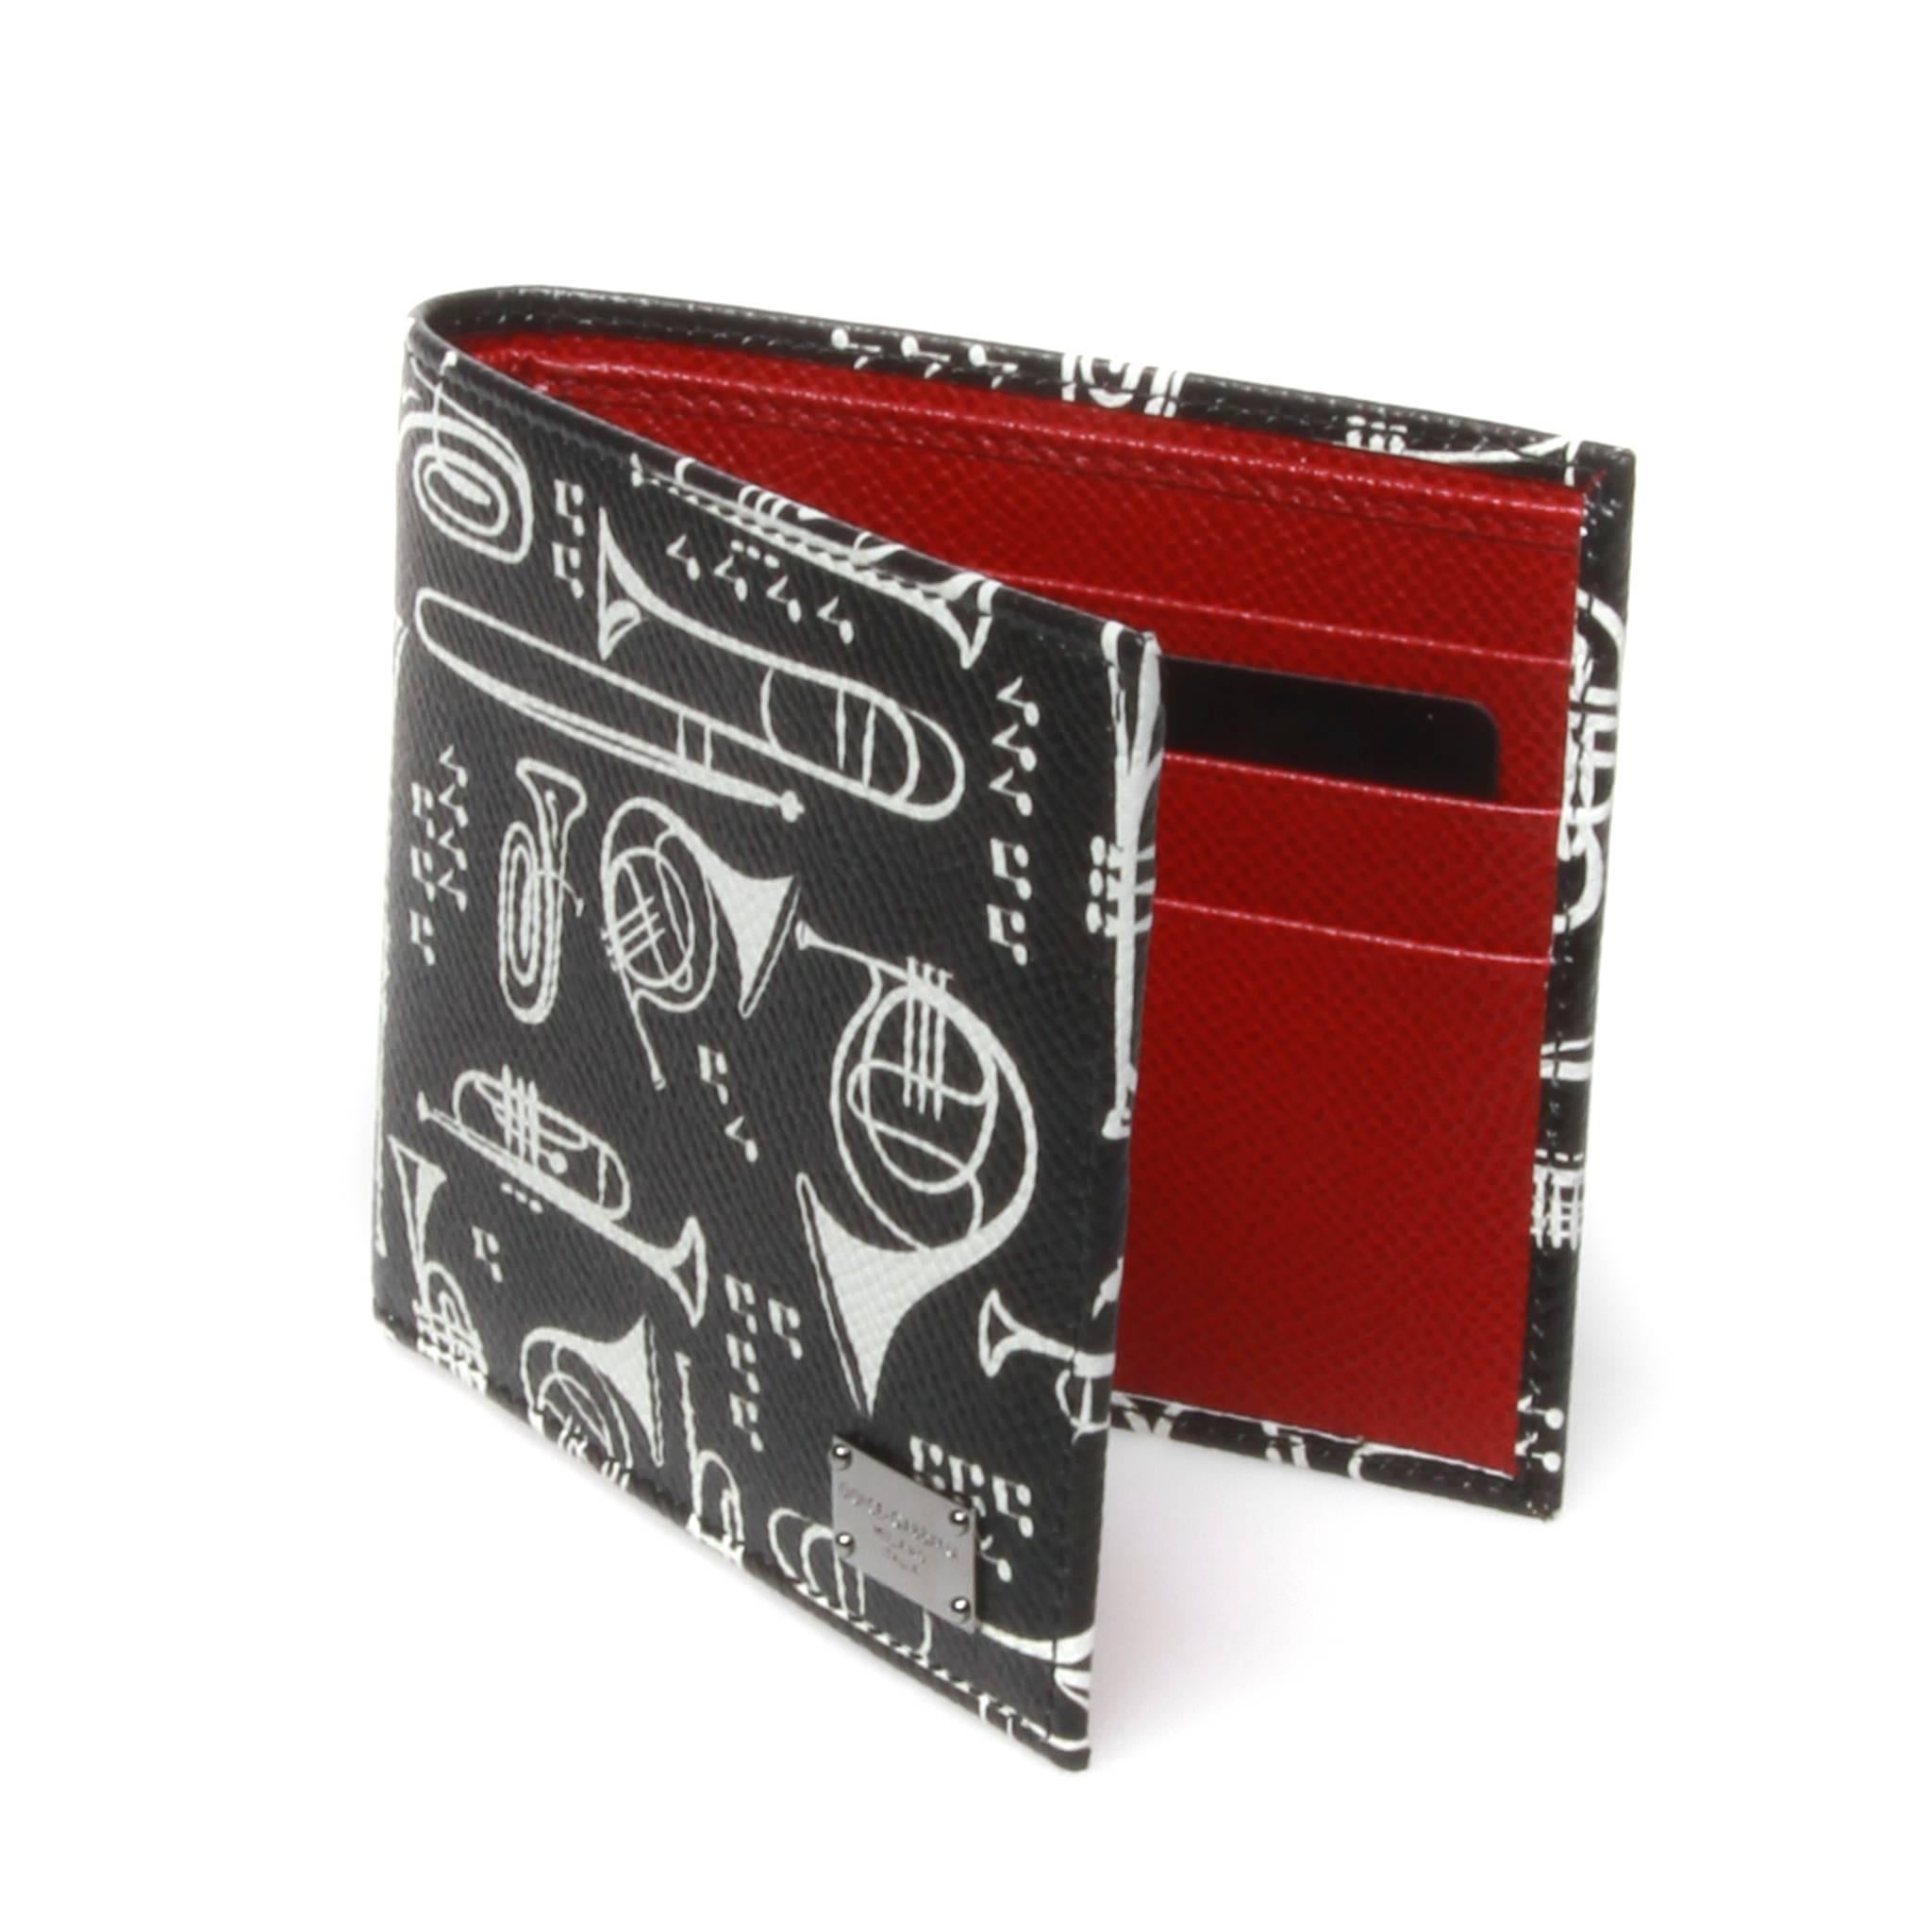 FINAL SALE

Dolce and Gabbana bi-fold dauphine calf leather wallet featuring a contrasting white musical instrument themed graphic. Red interior features 6 card slots and sleeve for notes and receipts. Silver-tone metal brand plaque to front side. 